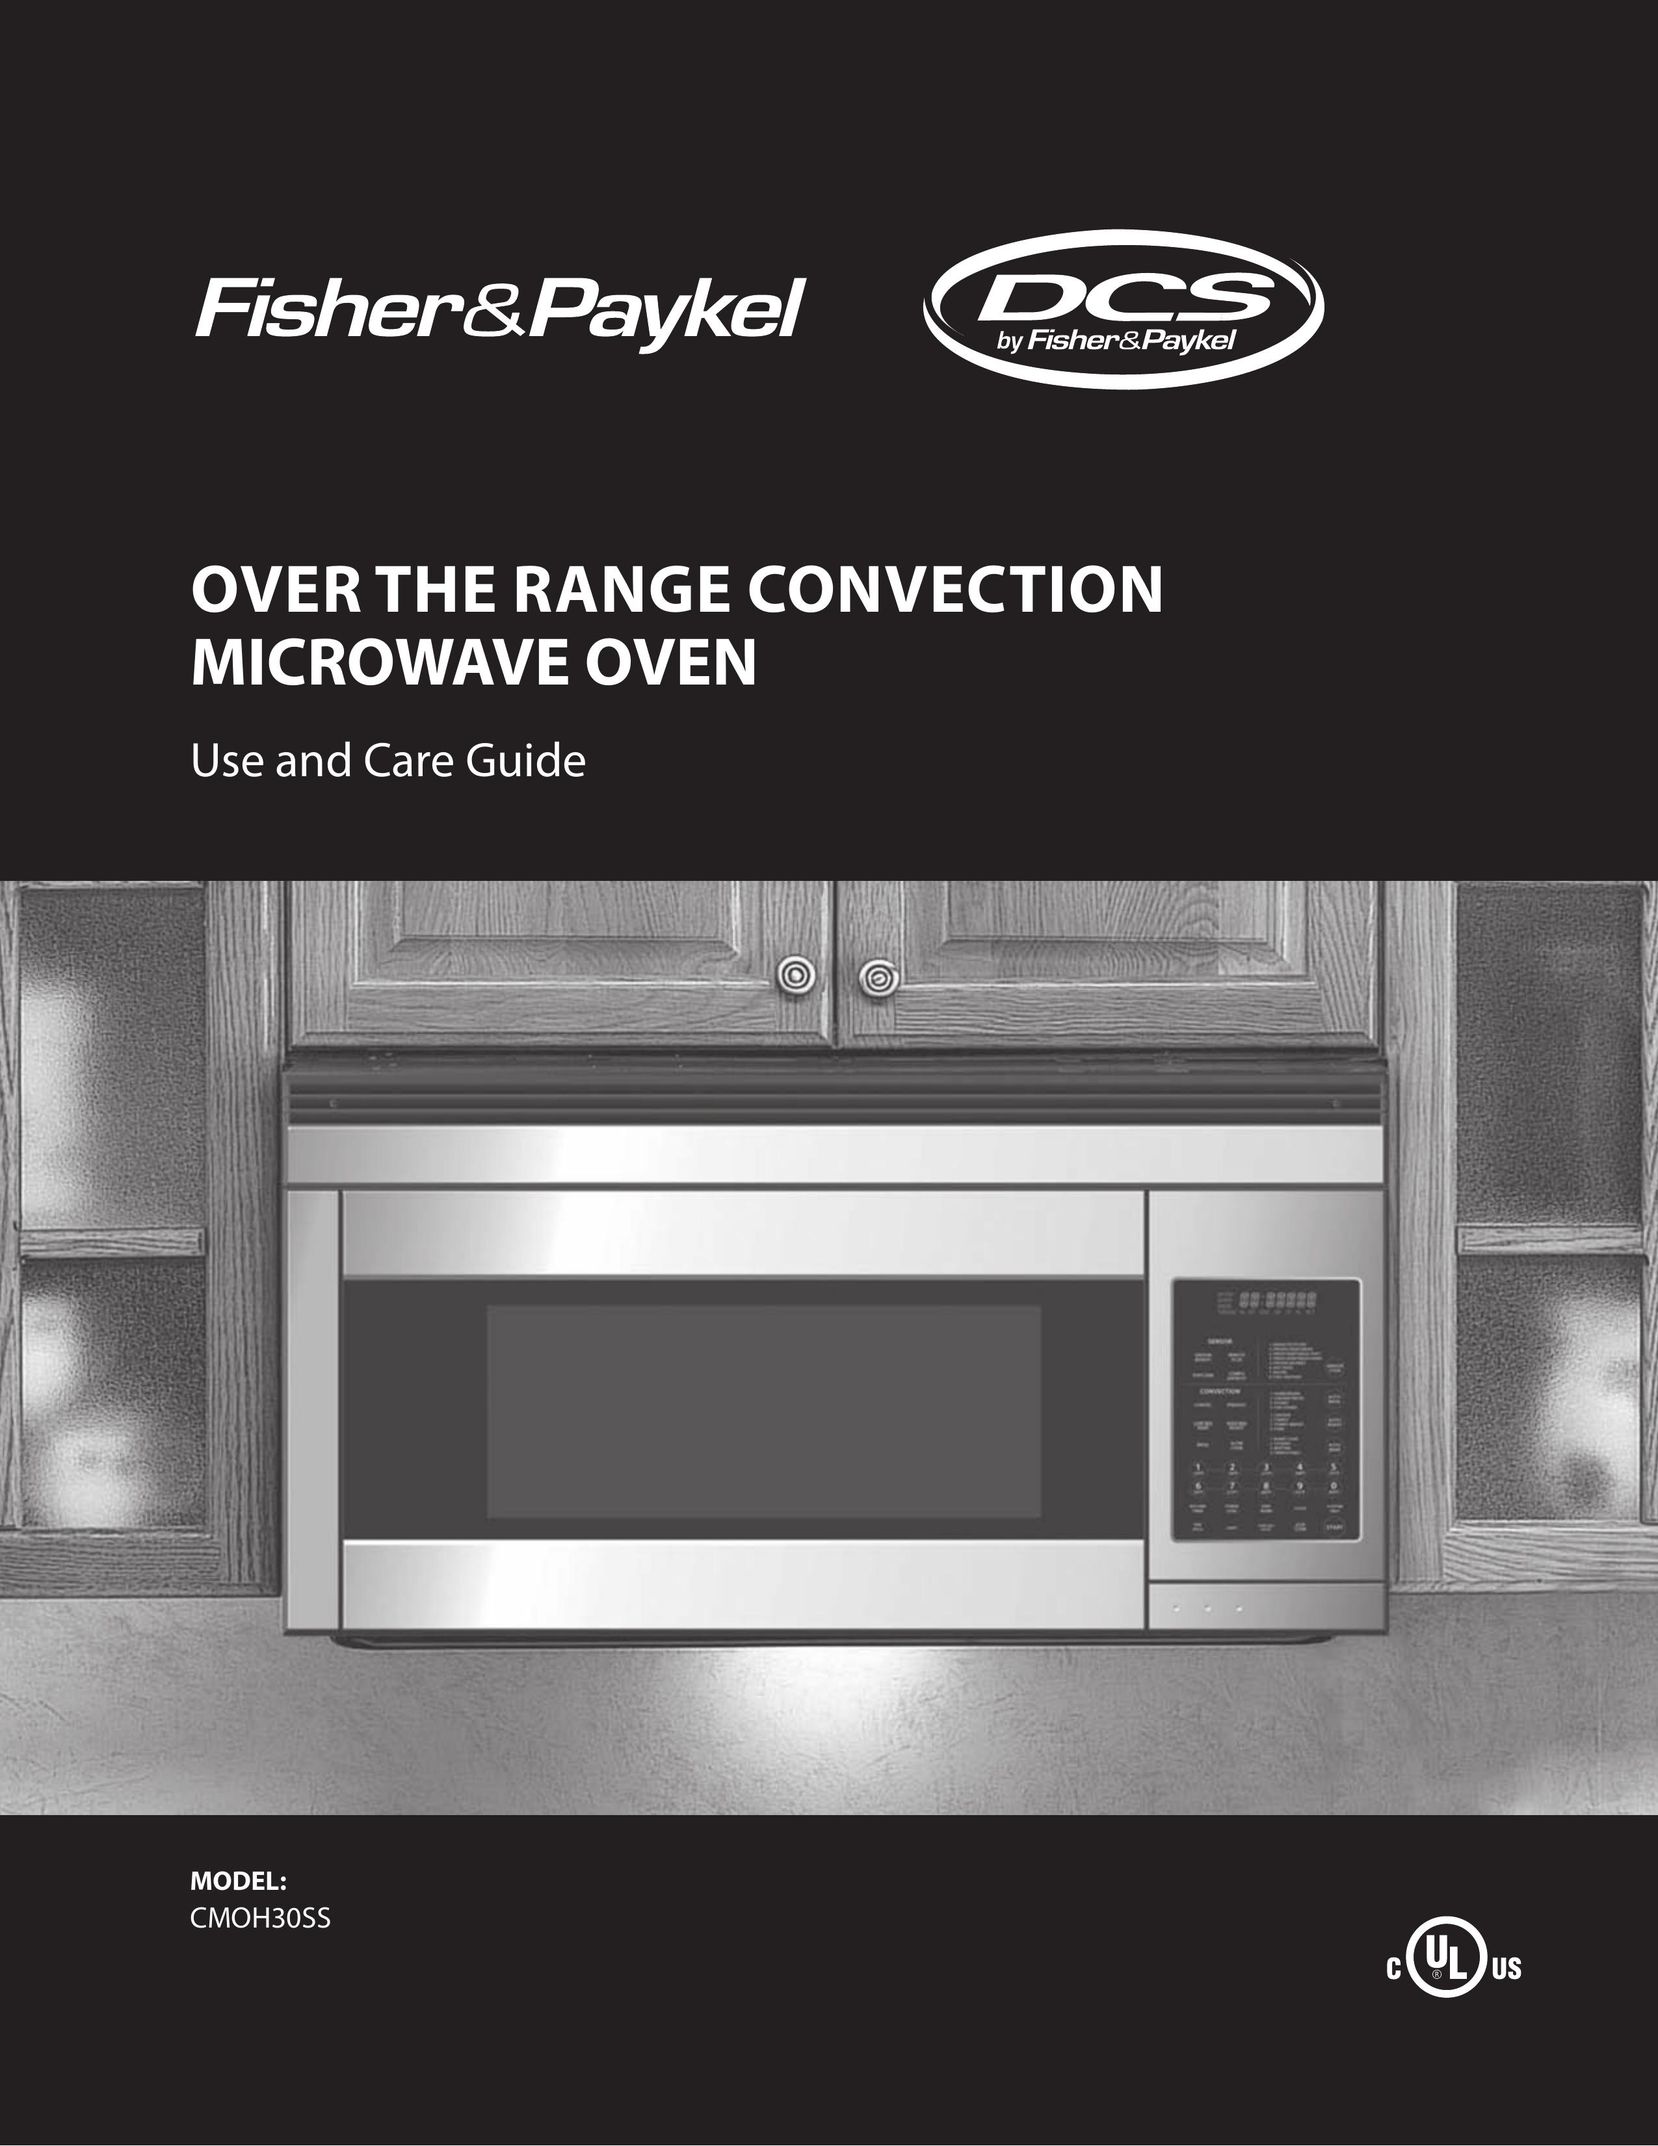 Fisher & Paykel CMOH30SS Microwave Oven User Manual